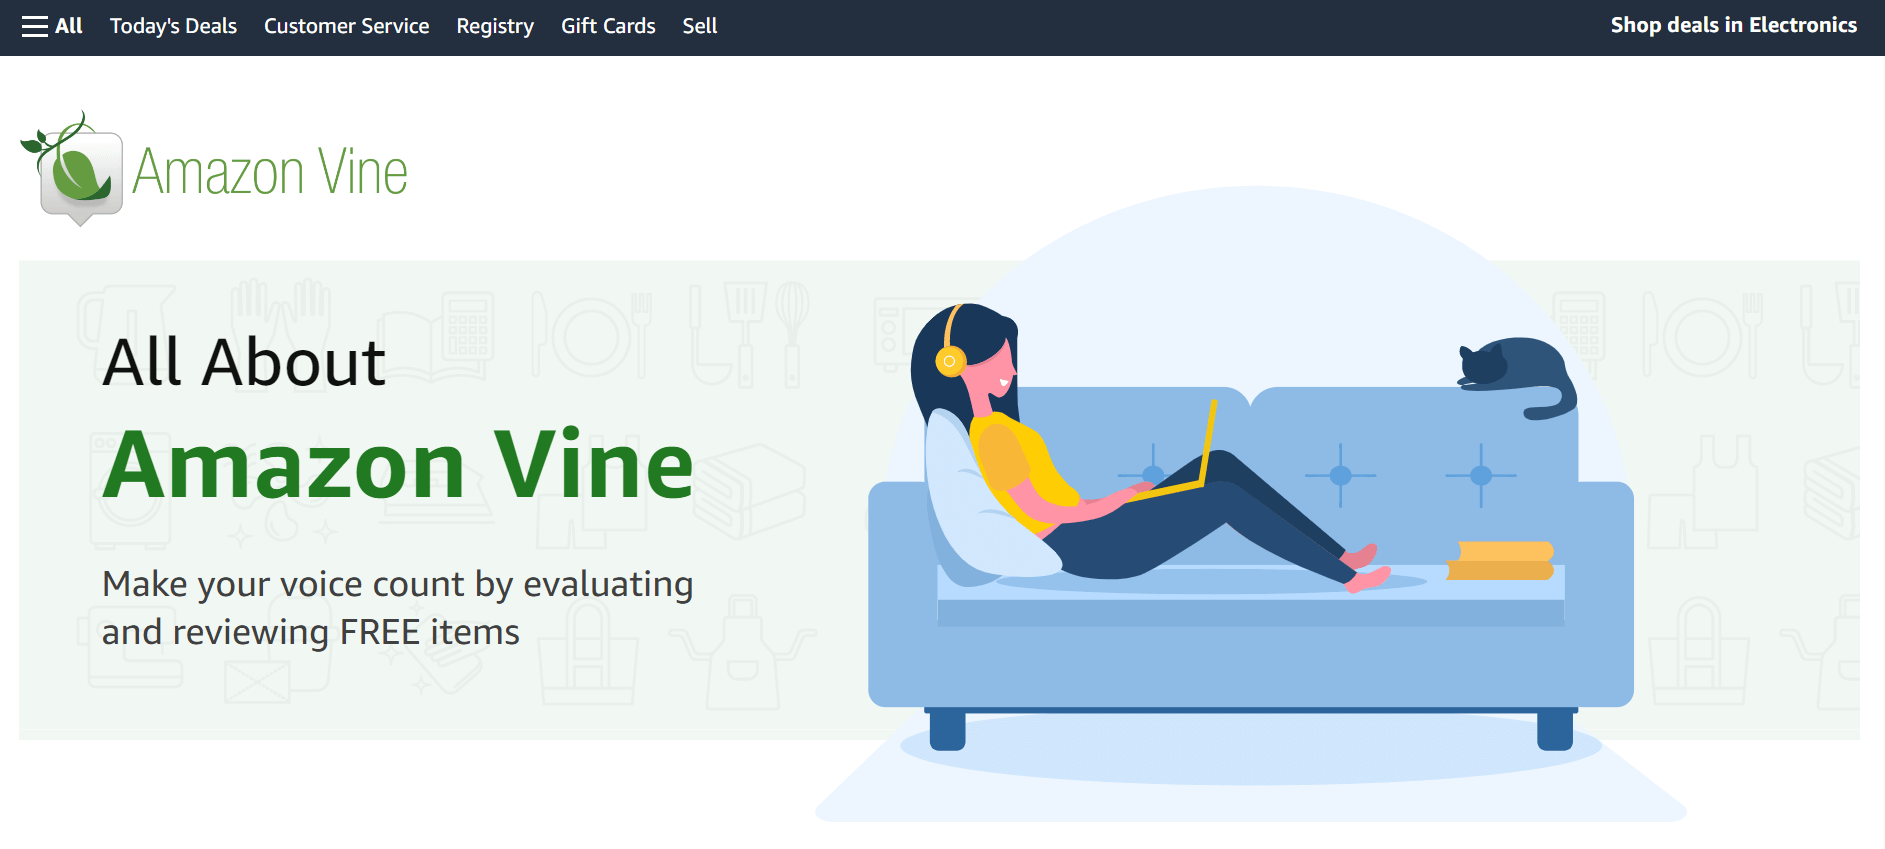 Amazon Vine is a reward program from Amazon to reviewers